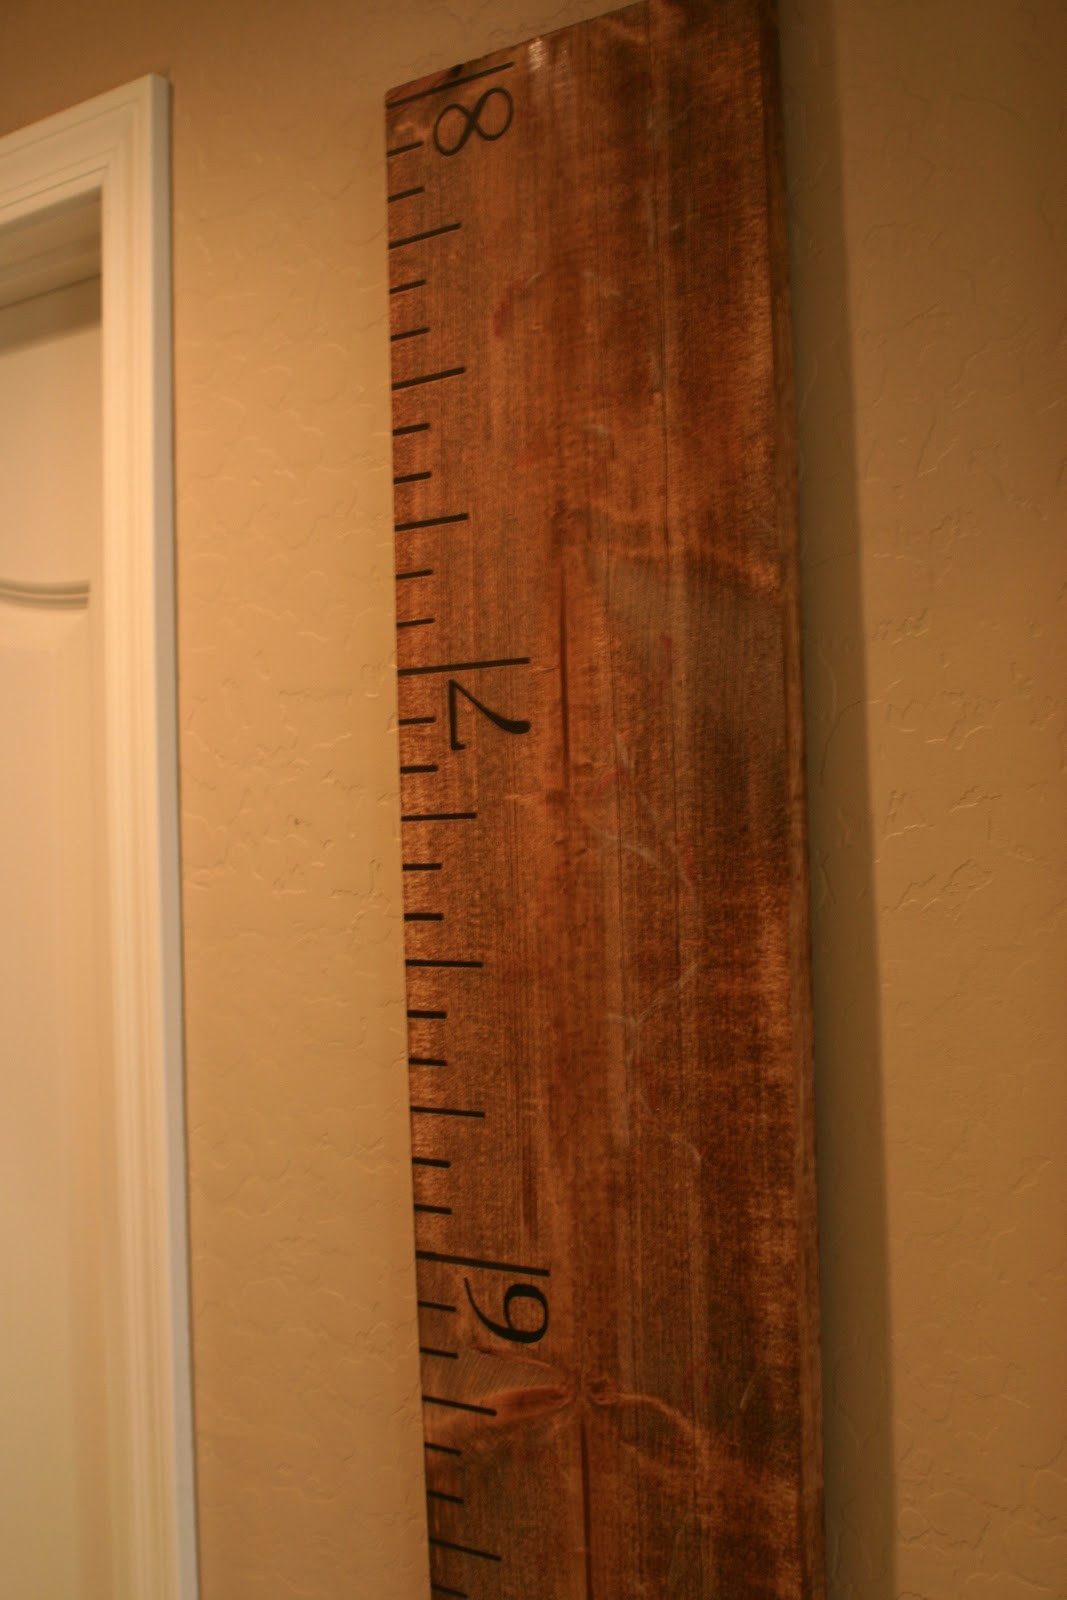 DIY Wooden Growth Chart
 Diy Wood Growth Chart Plans Free PDF Download